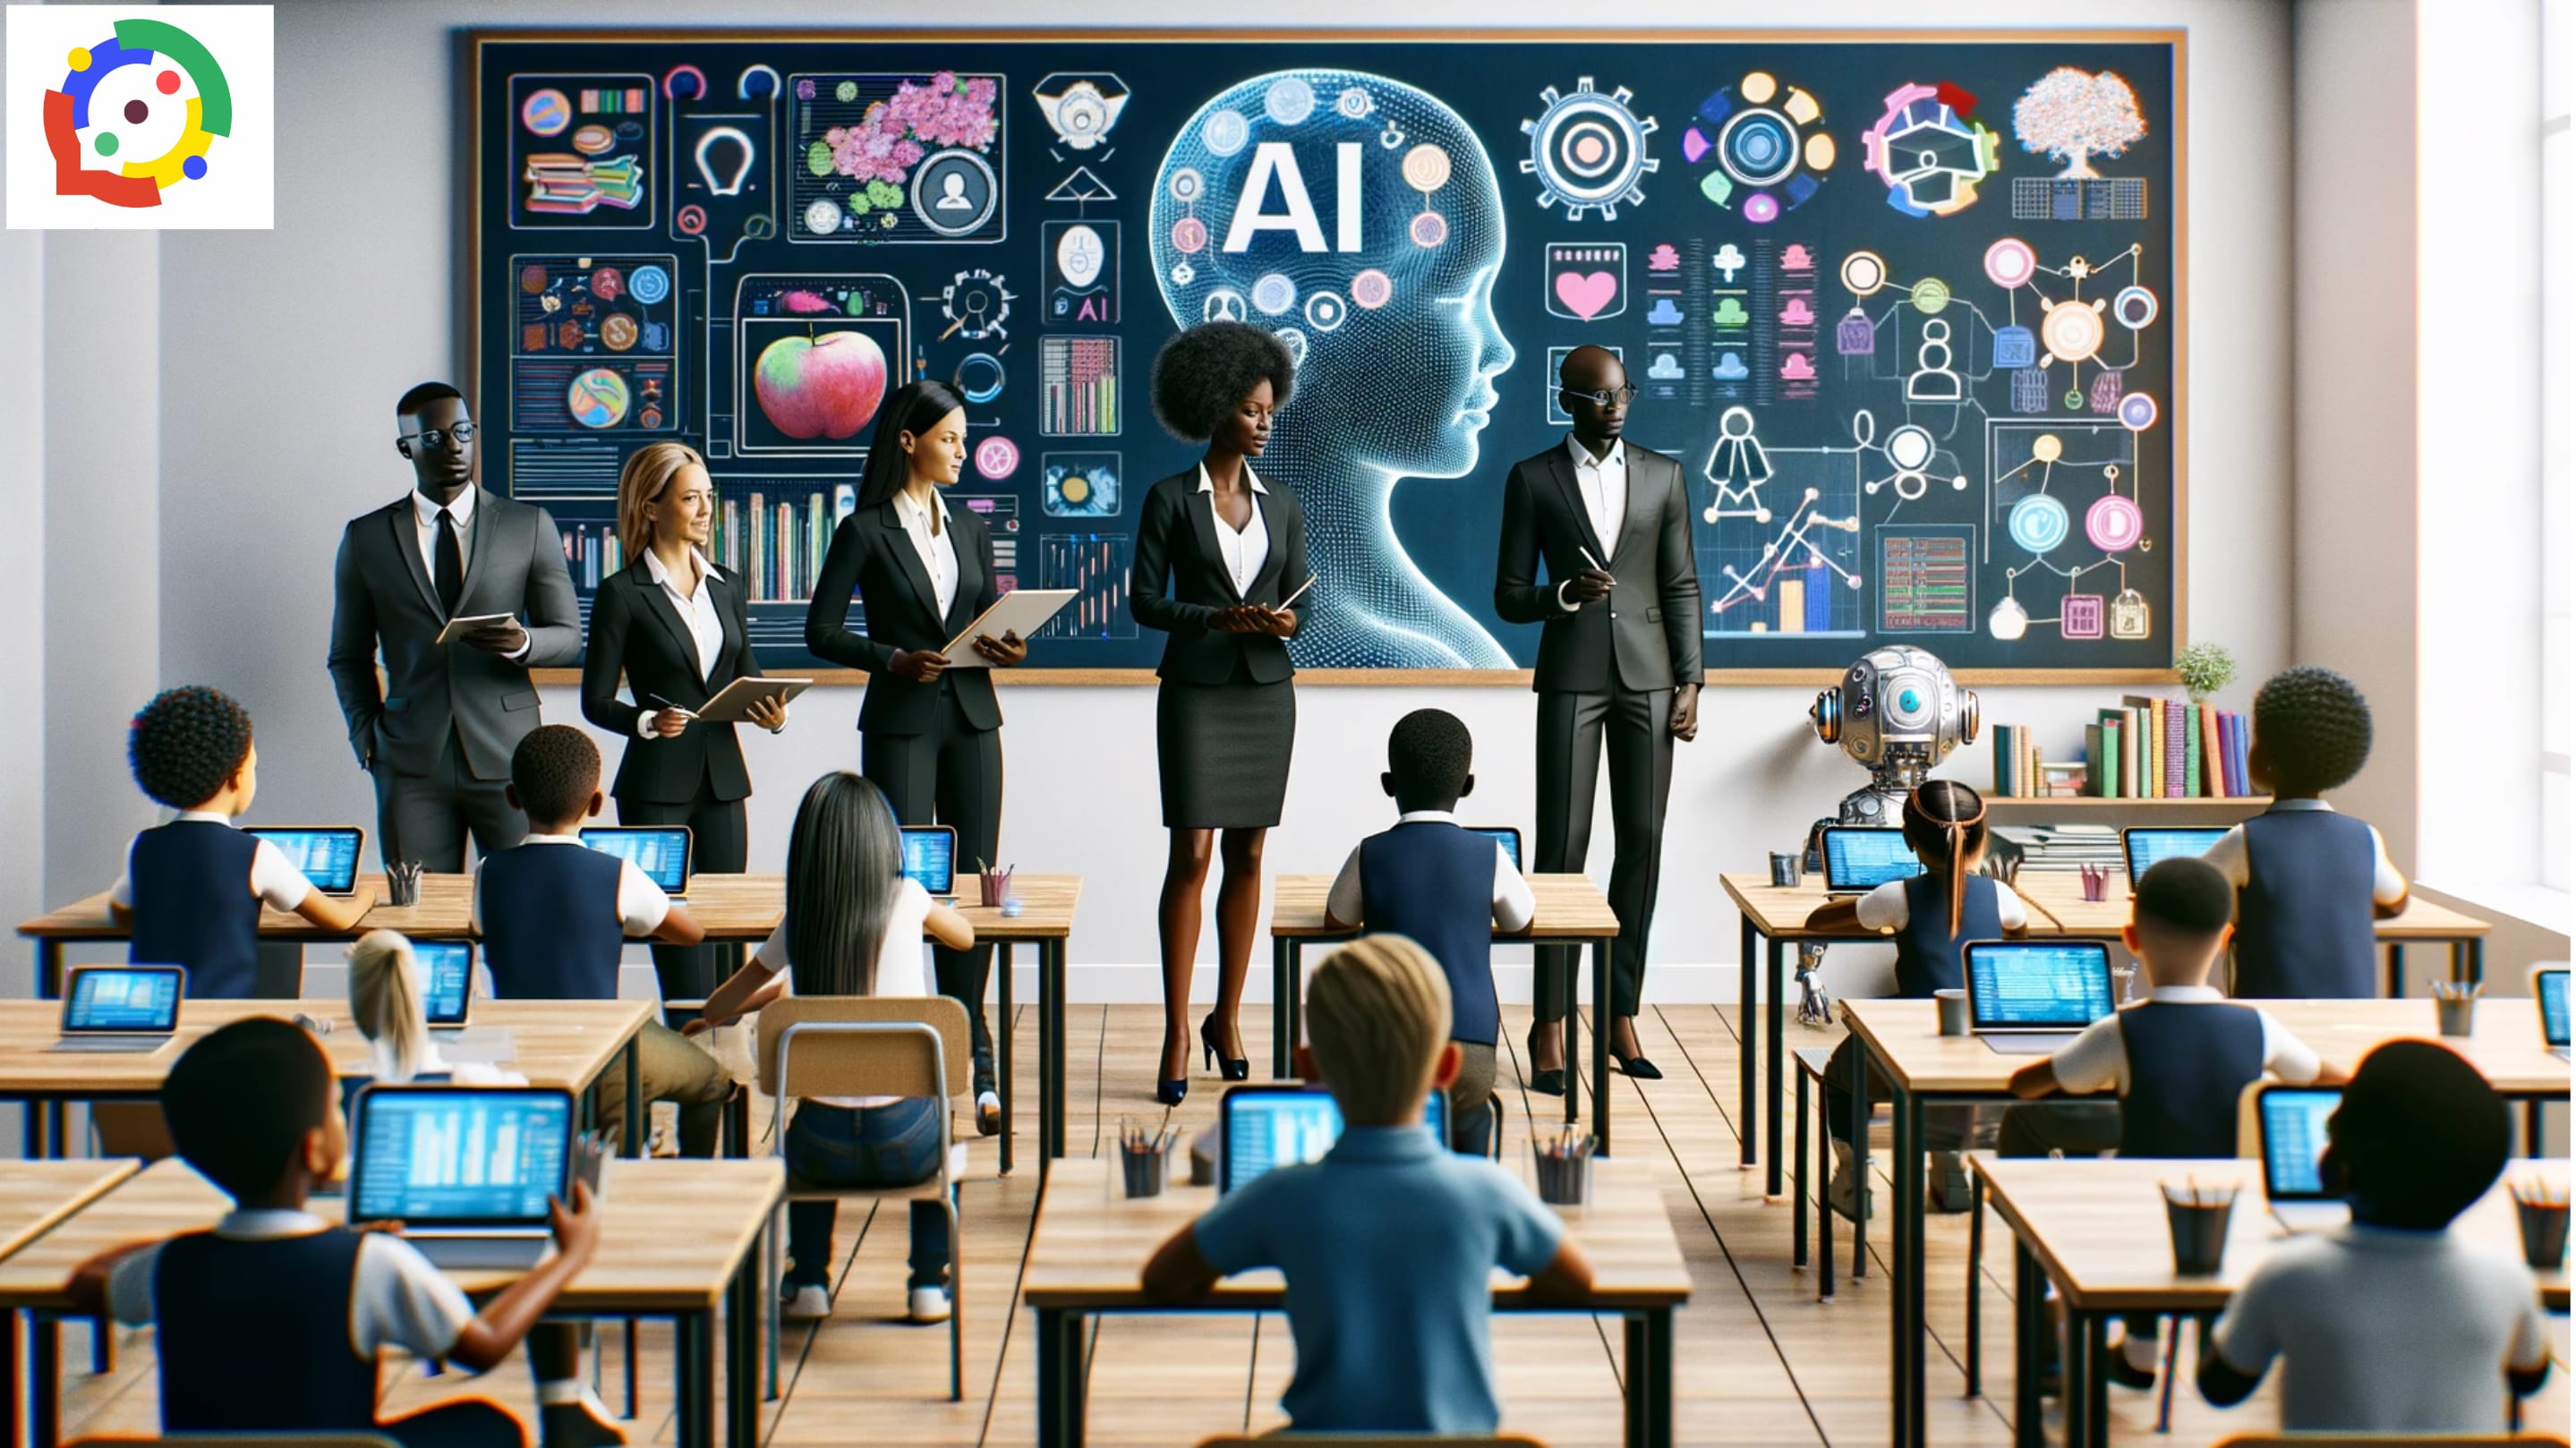 Educators and Trainers teaching about AI